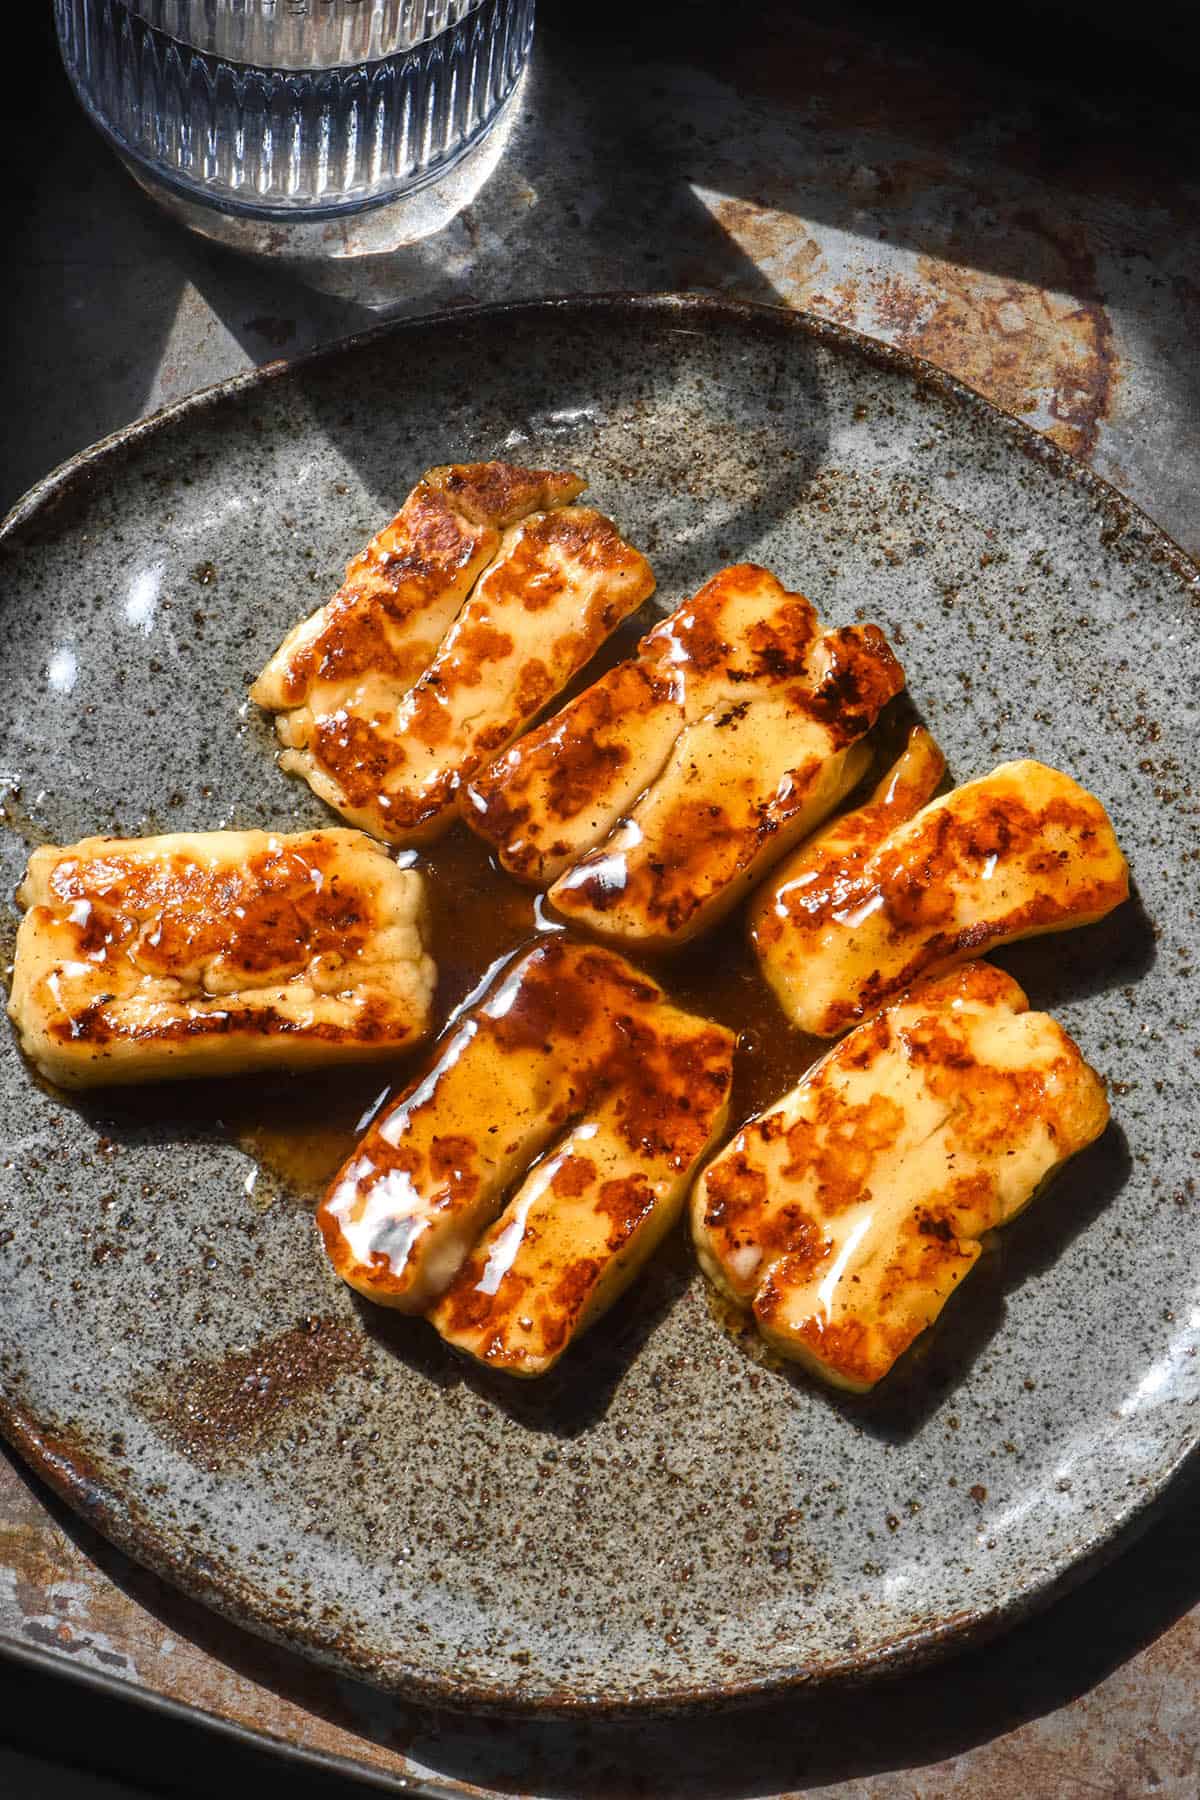 An aerial image of golden brown halloumi pieces with a honey lemon glaze. The halloumi sits atop a dark speckled ceramic plate on a dark steel backdrop